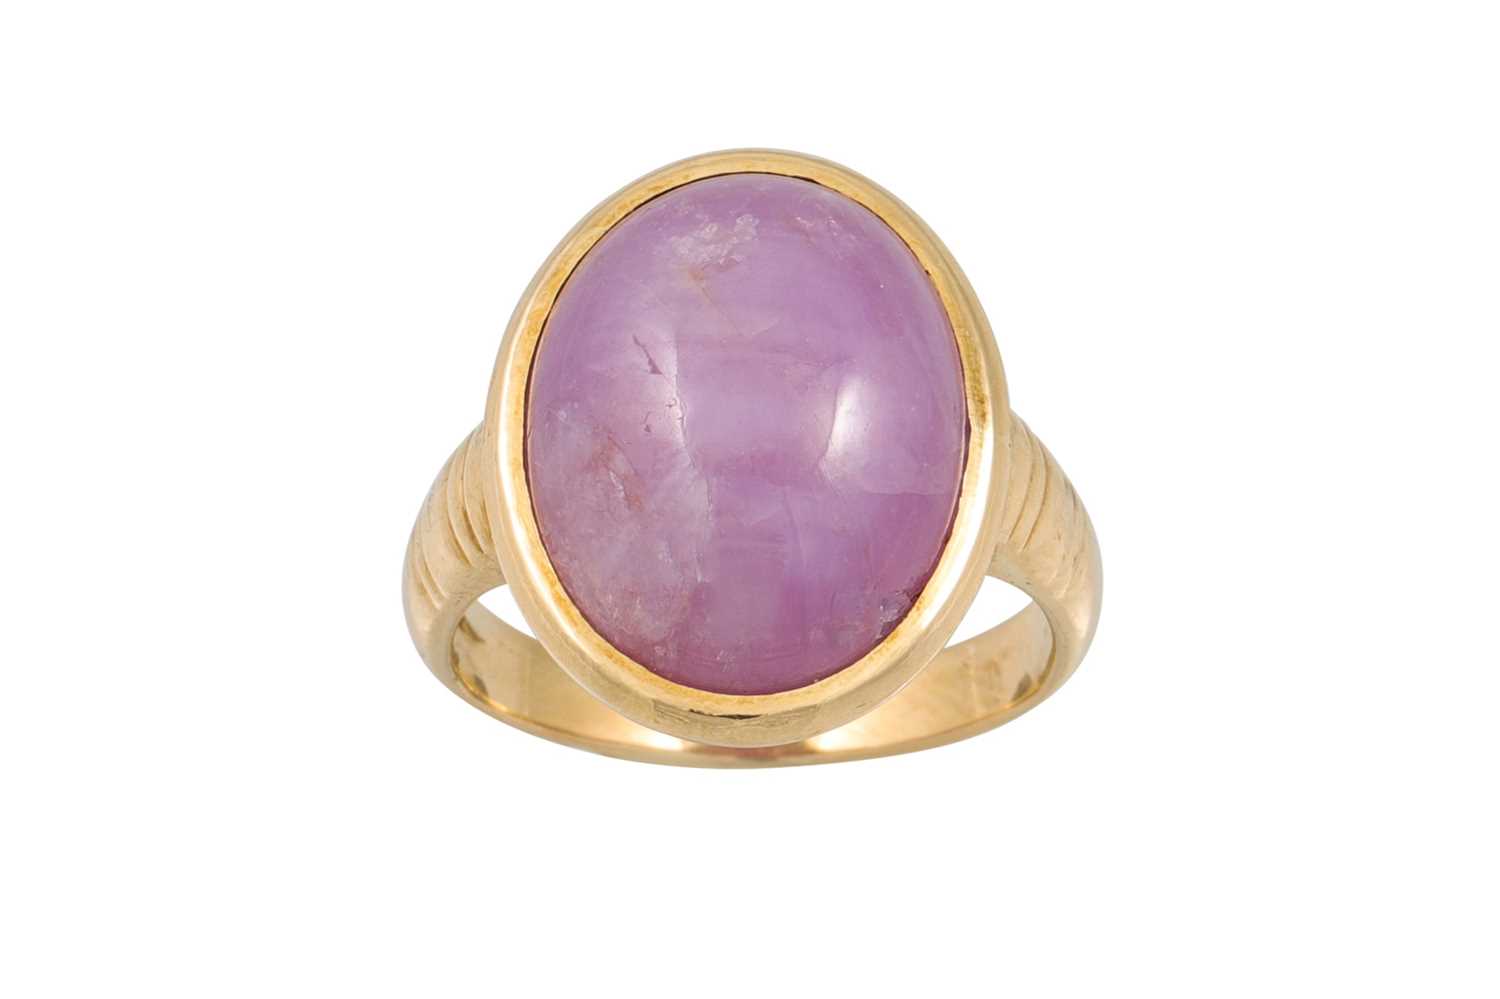 Lot 194 - A CABOCHON RUBY DRESS RING, mounted in 18ct gold